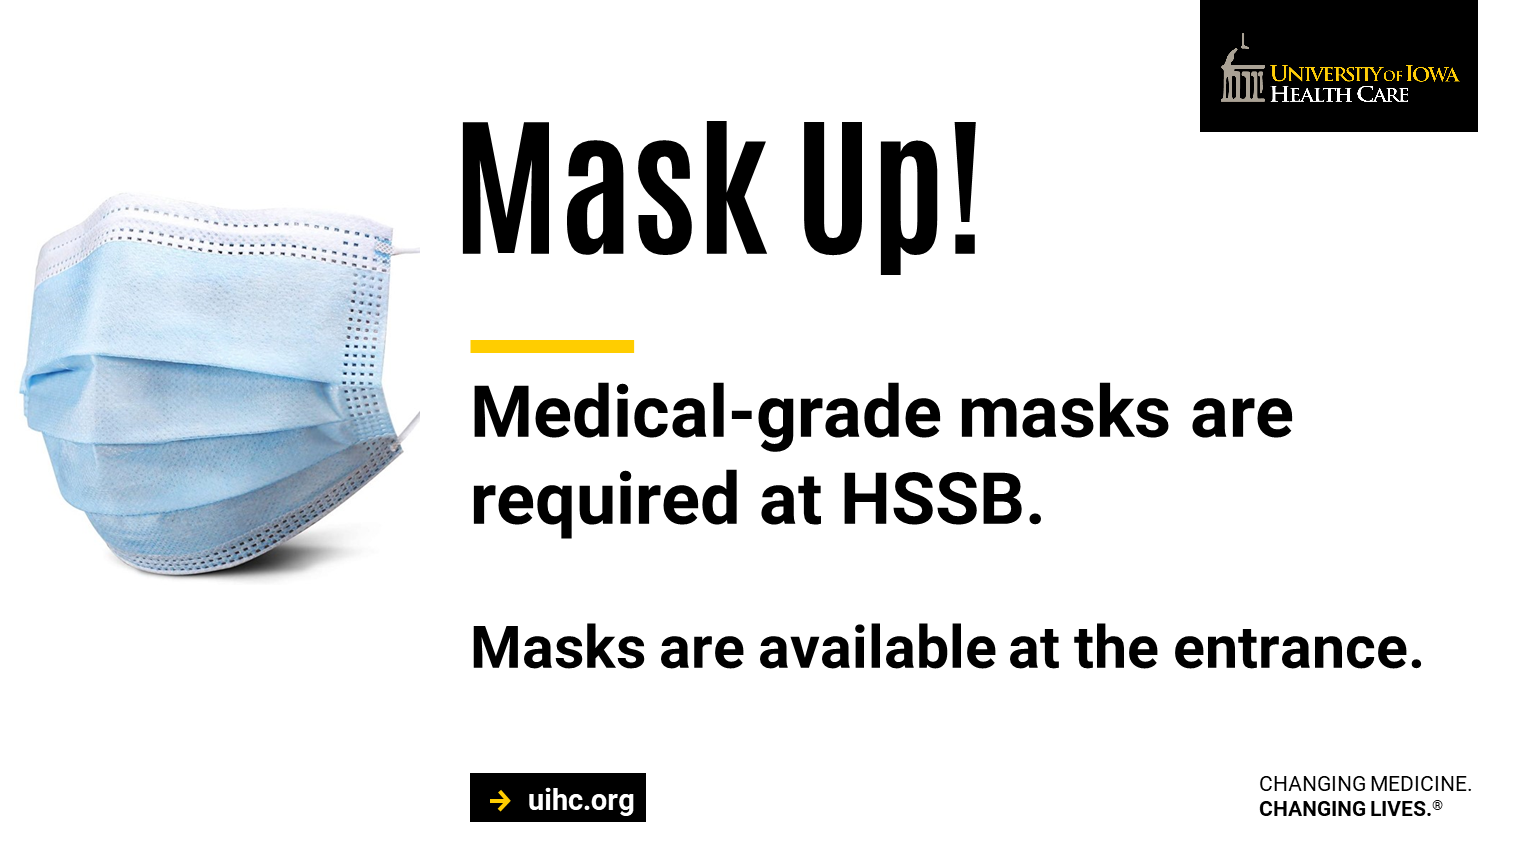 Please wear your medical grade mask during events at HSSB